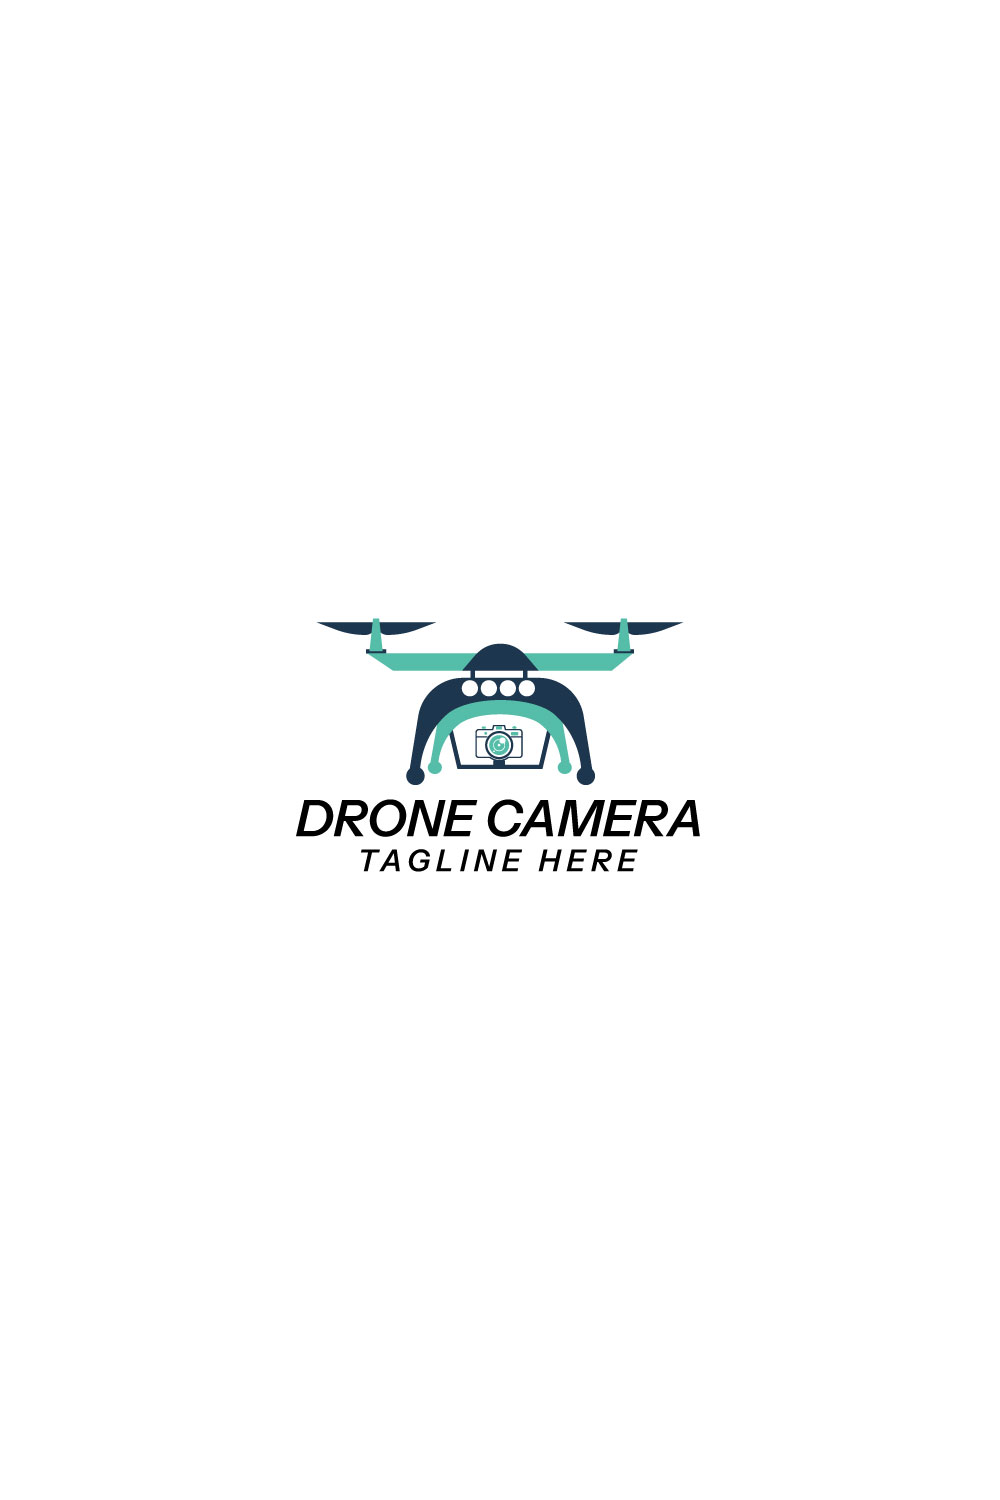 Drone with camera vector logo design template pinterest preview image.